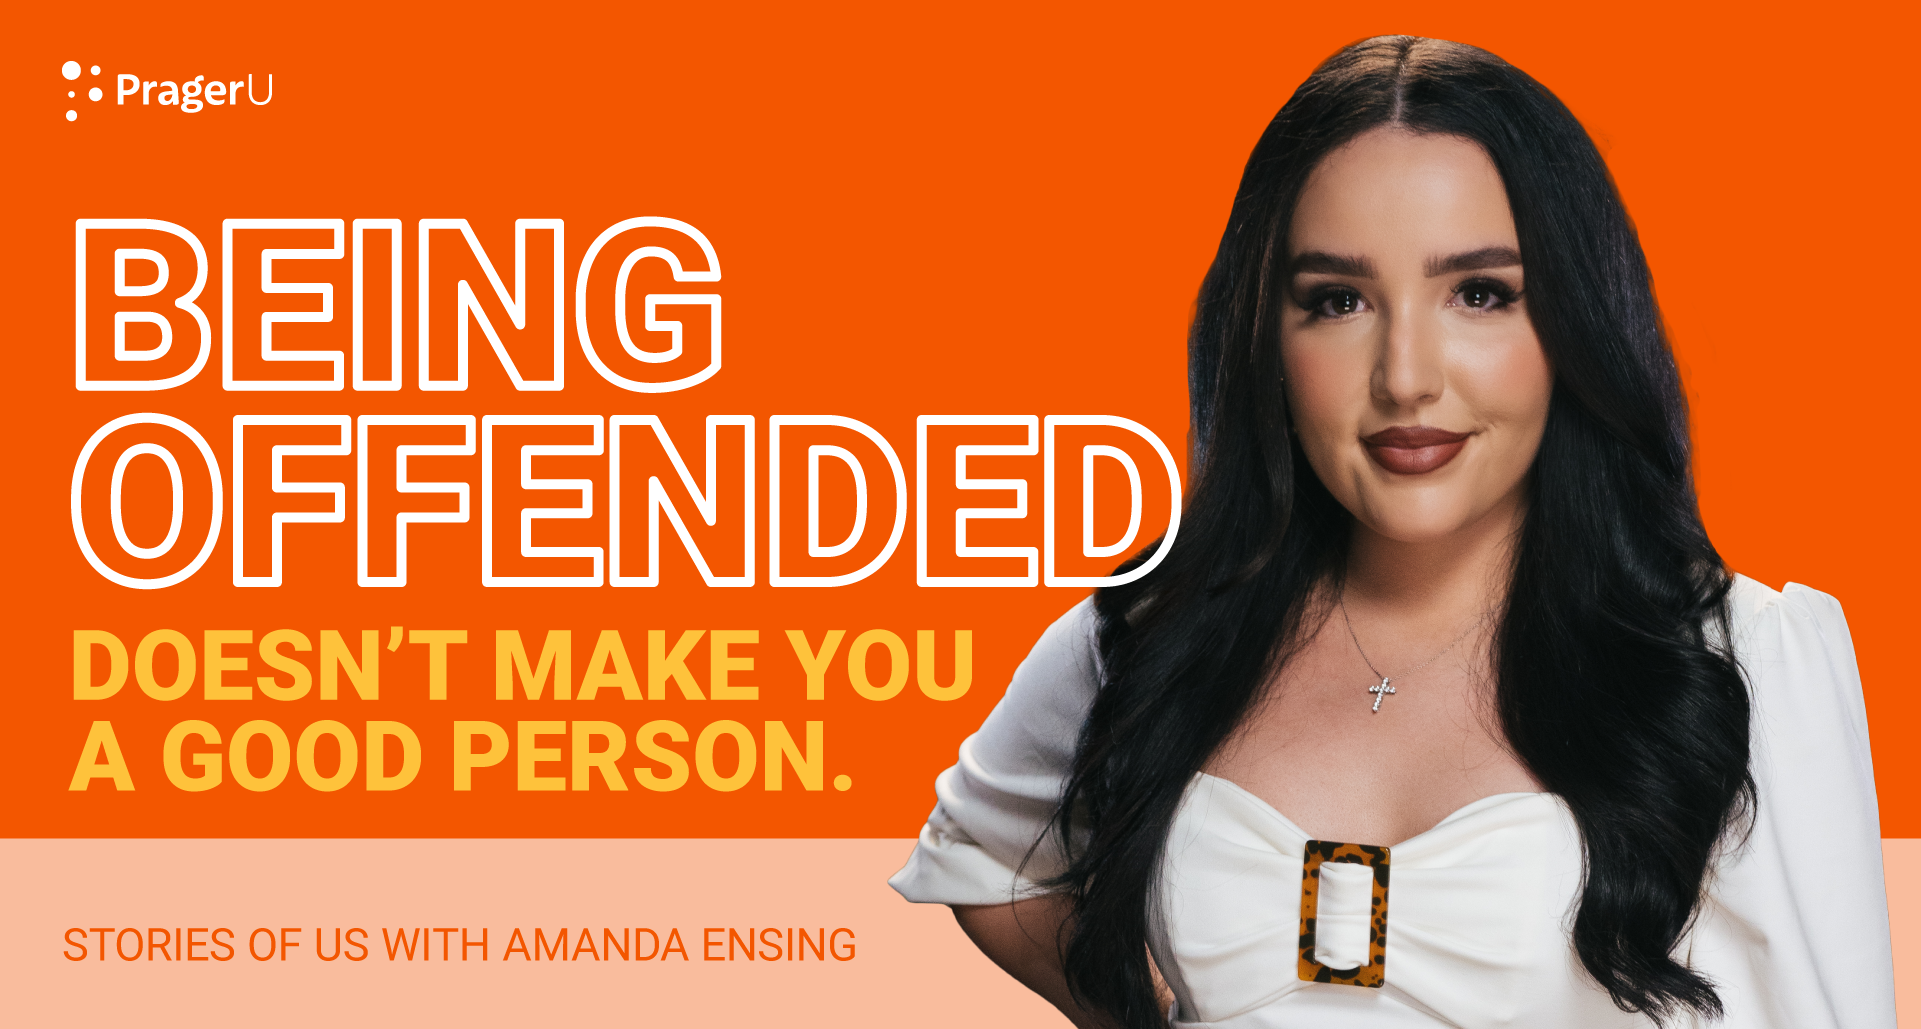 Being Offended Doesn't Make You a Good Person